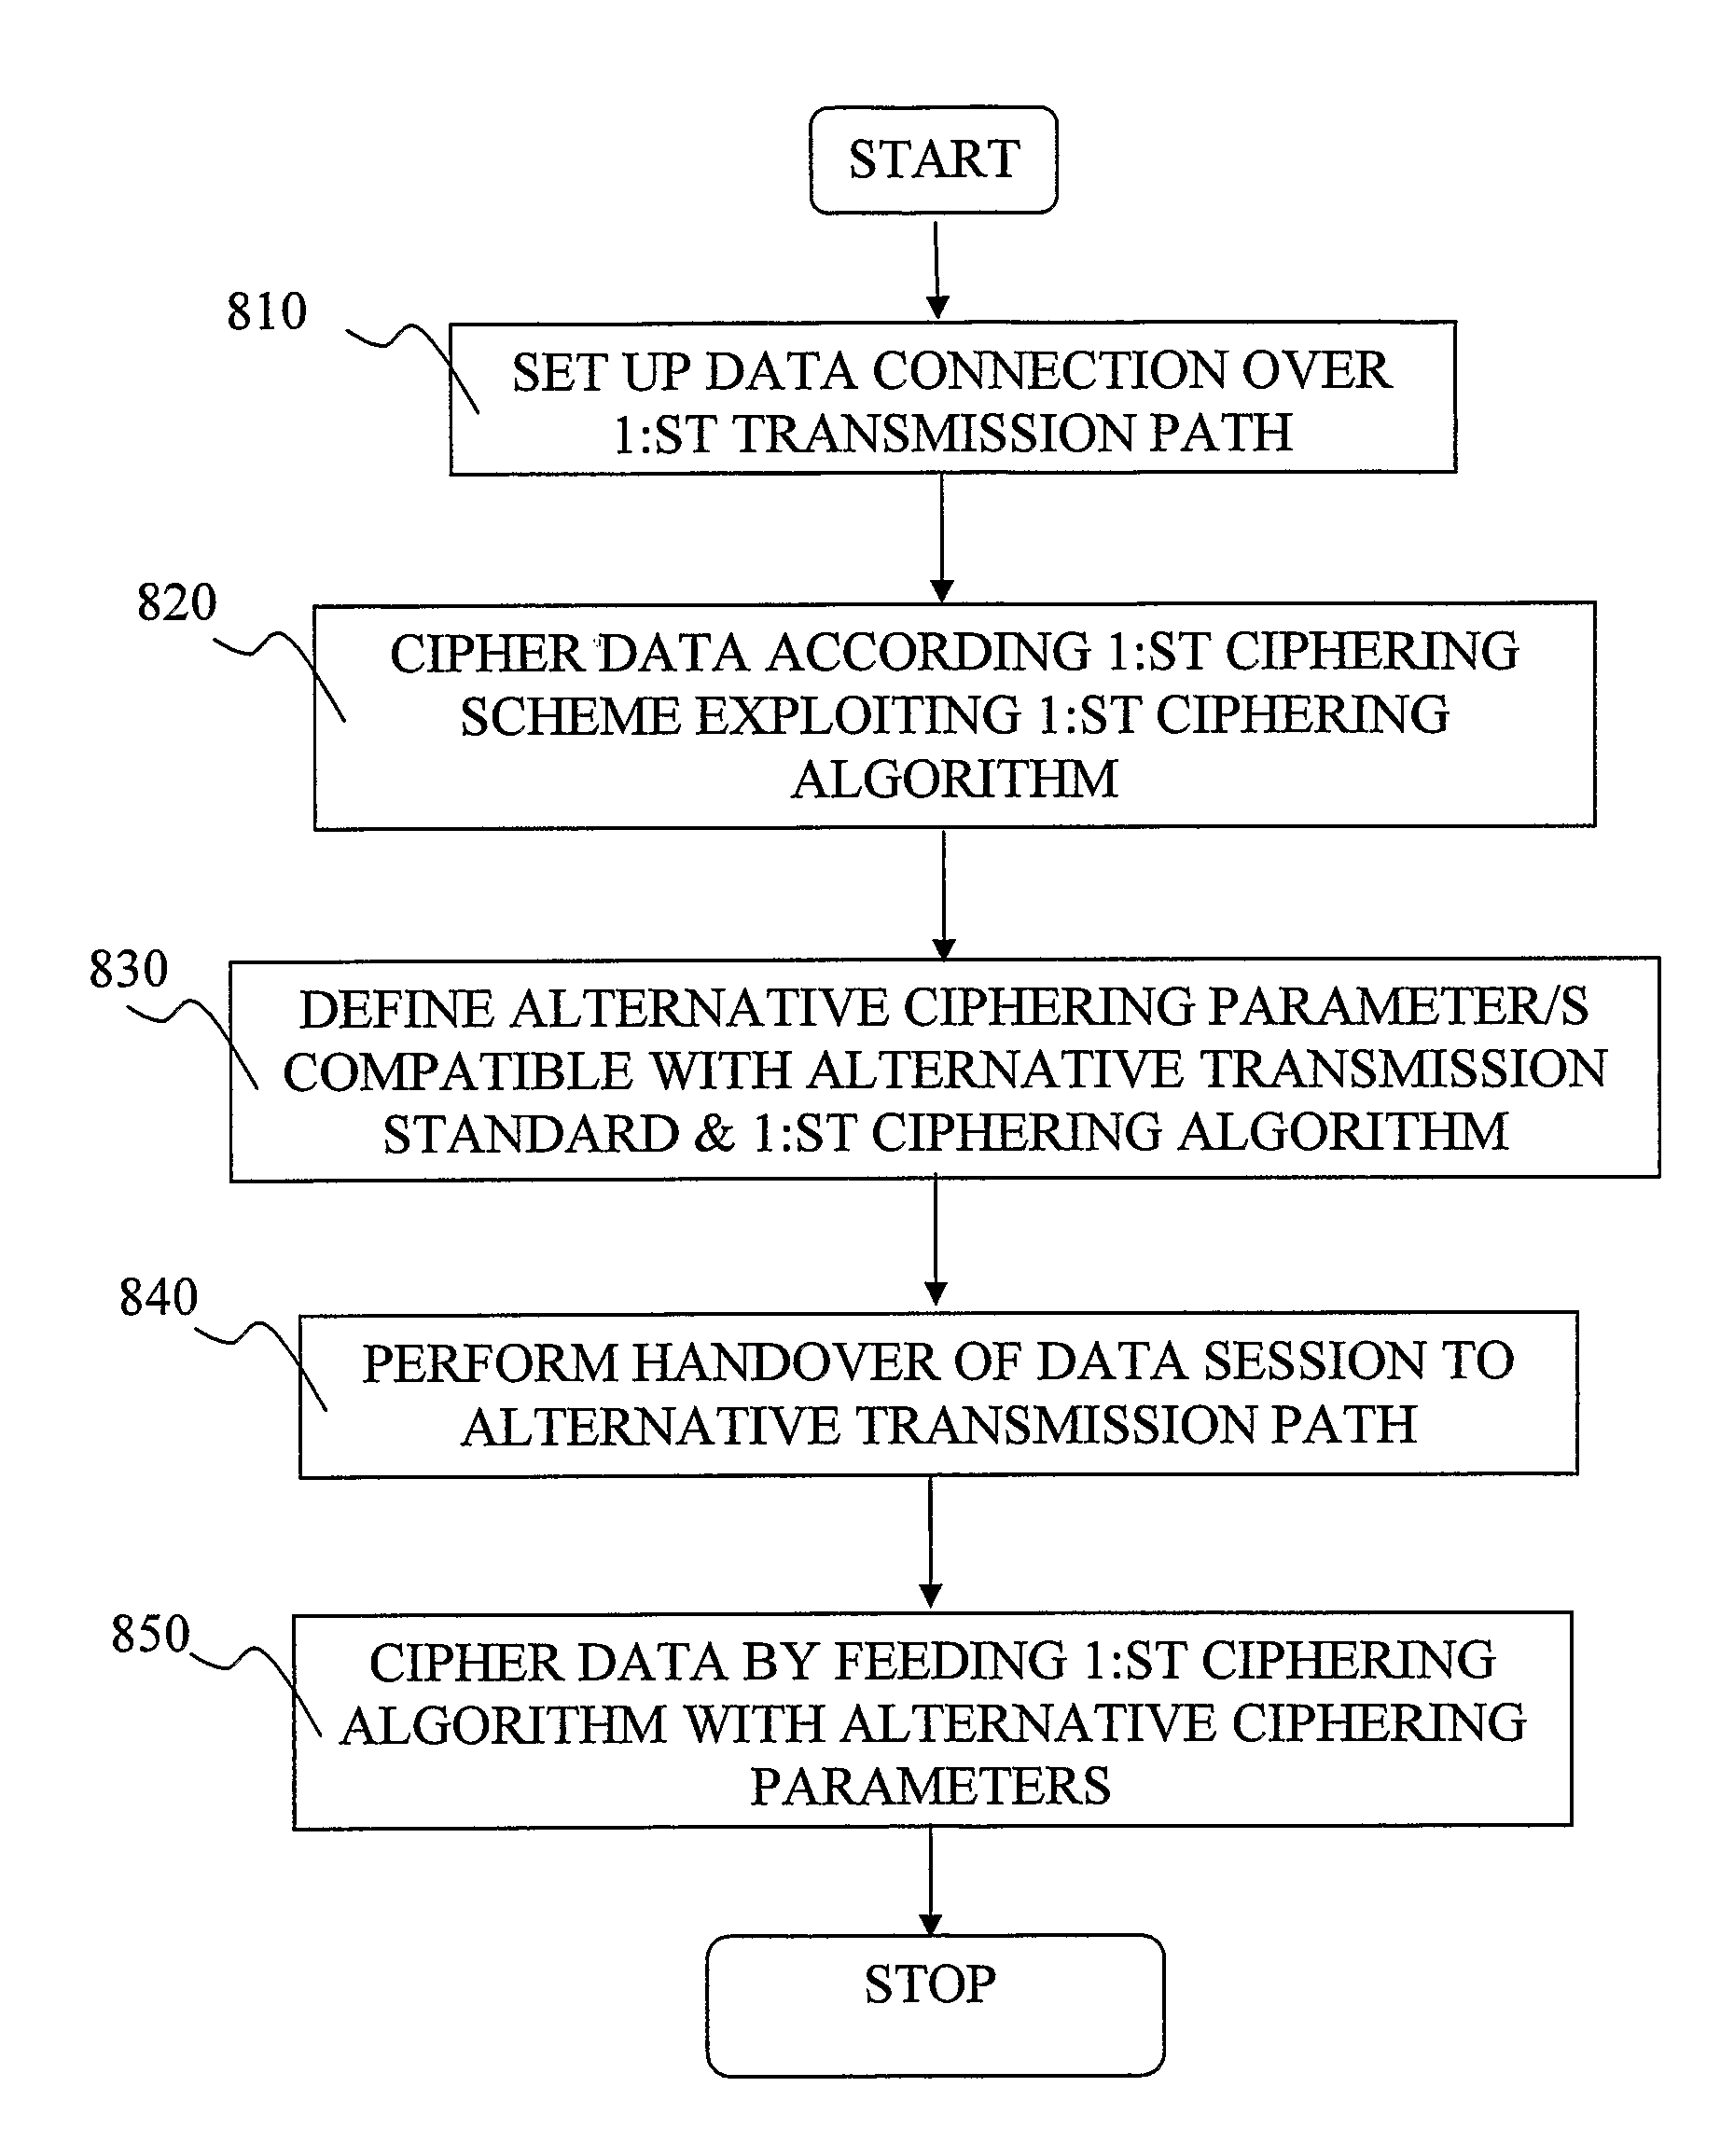 Means and method for ciphering and transmitting data in integrated networks